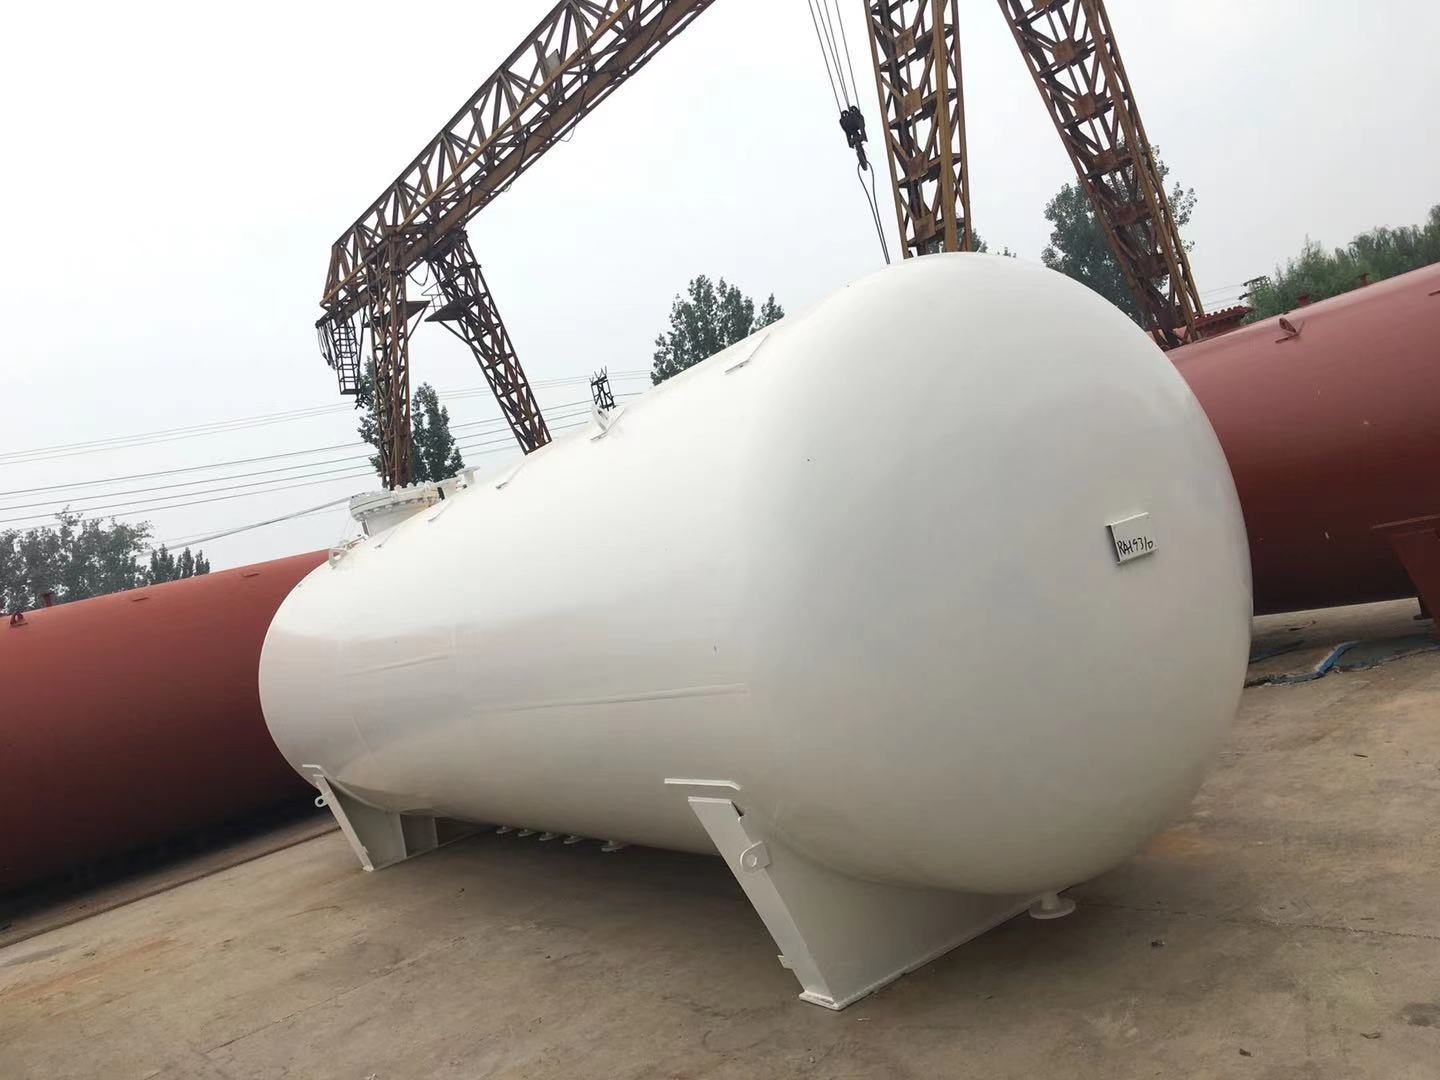 Precautions for cleaning liquefied petroleum gas storage tanks